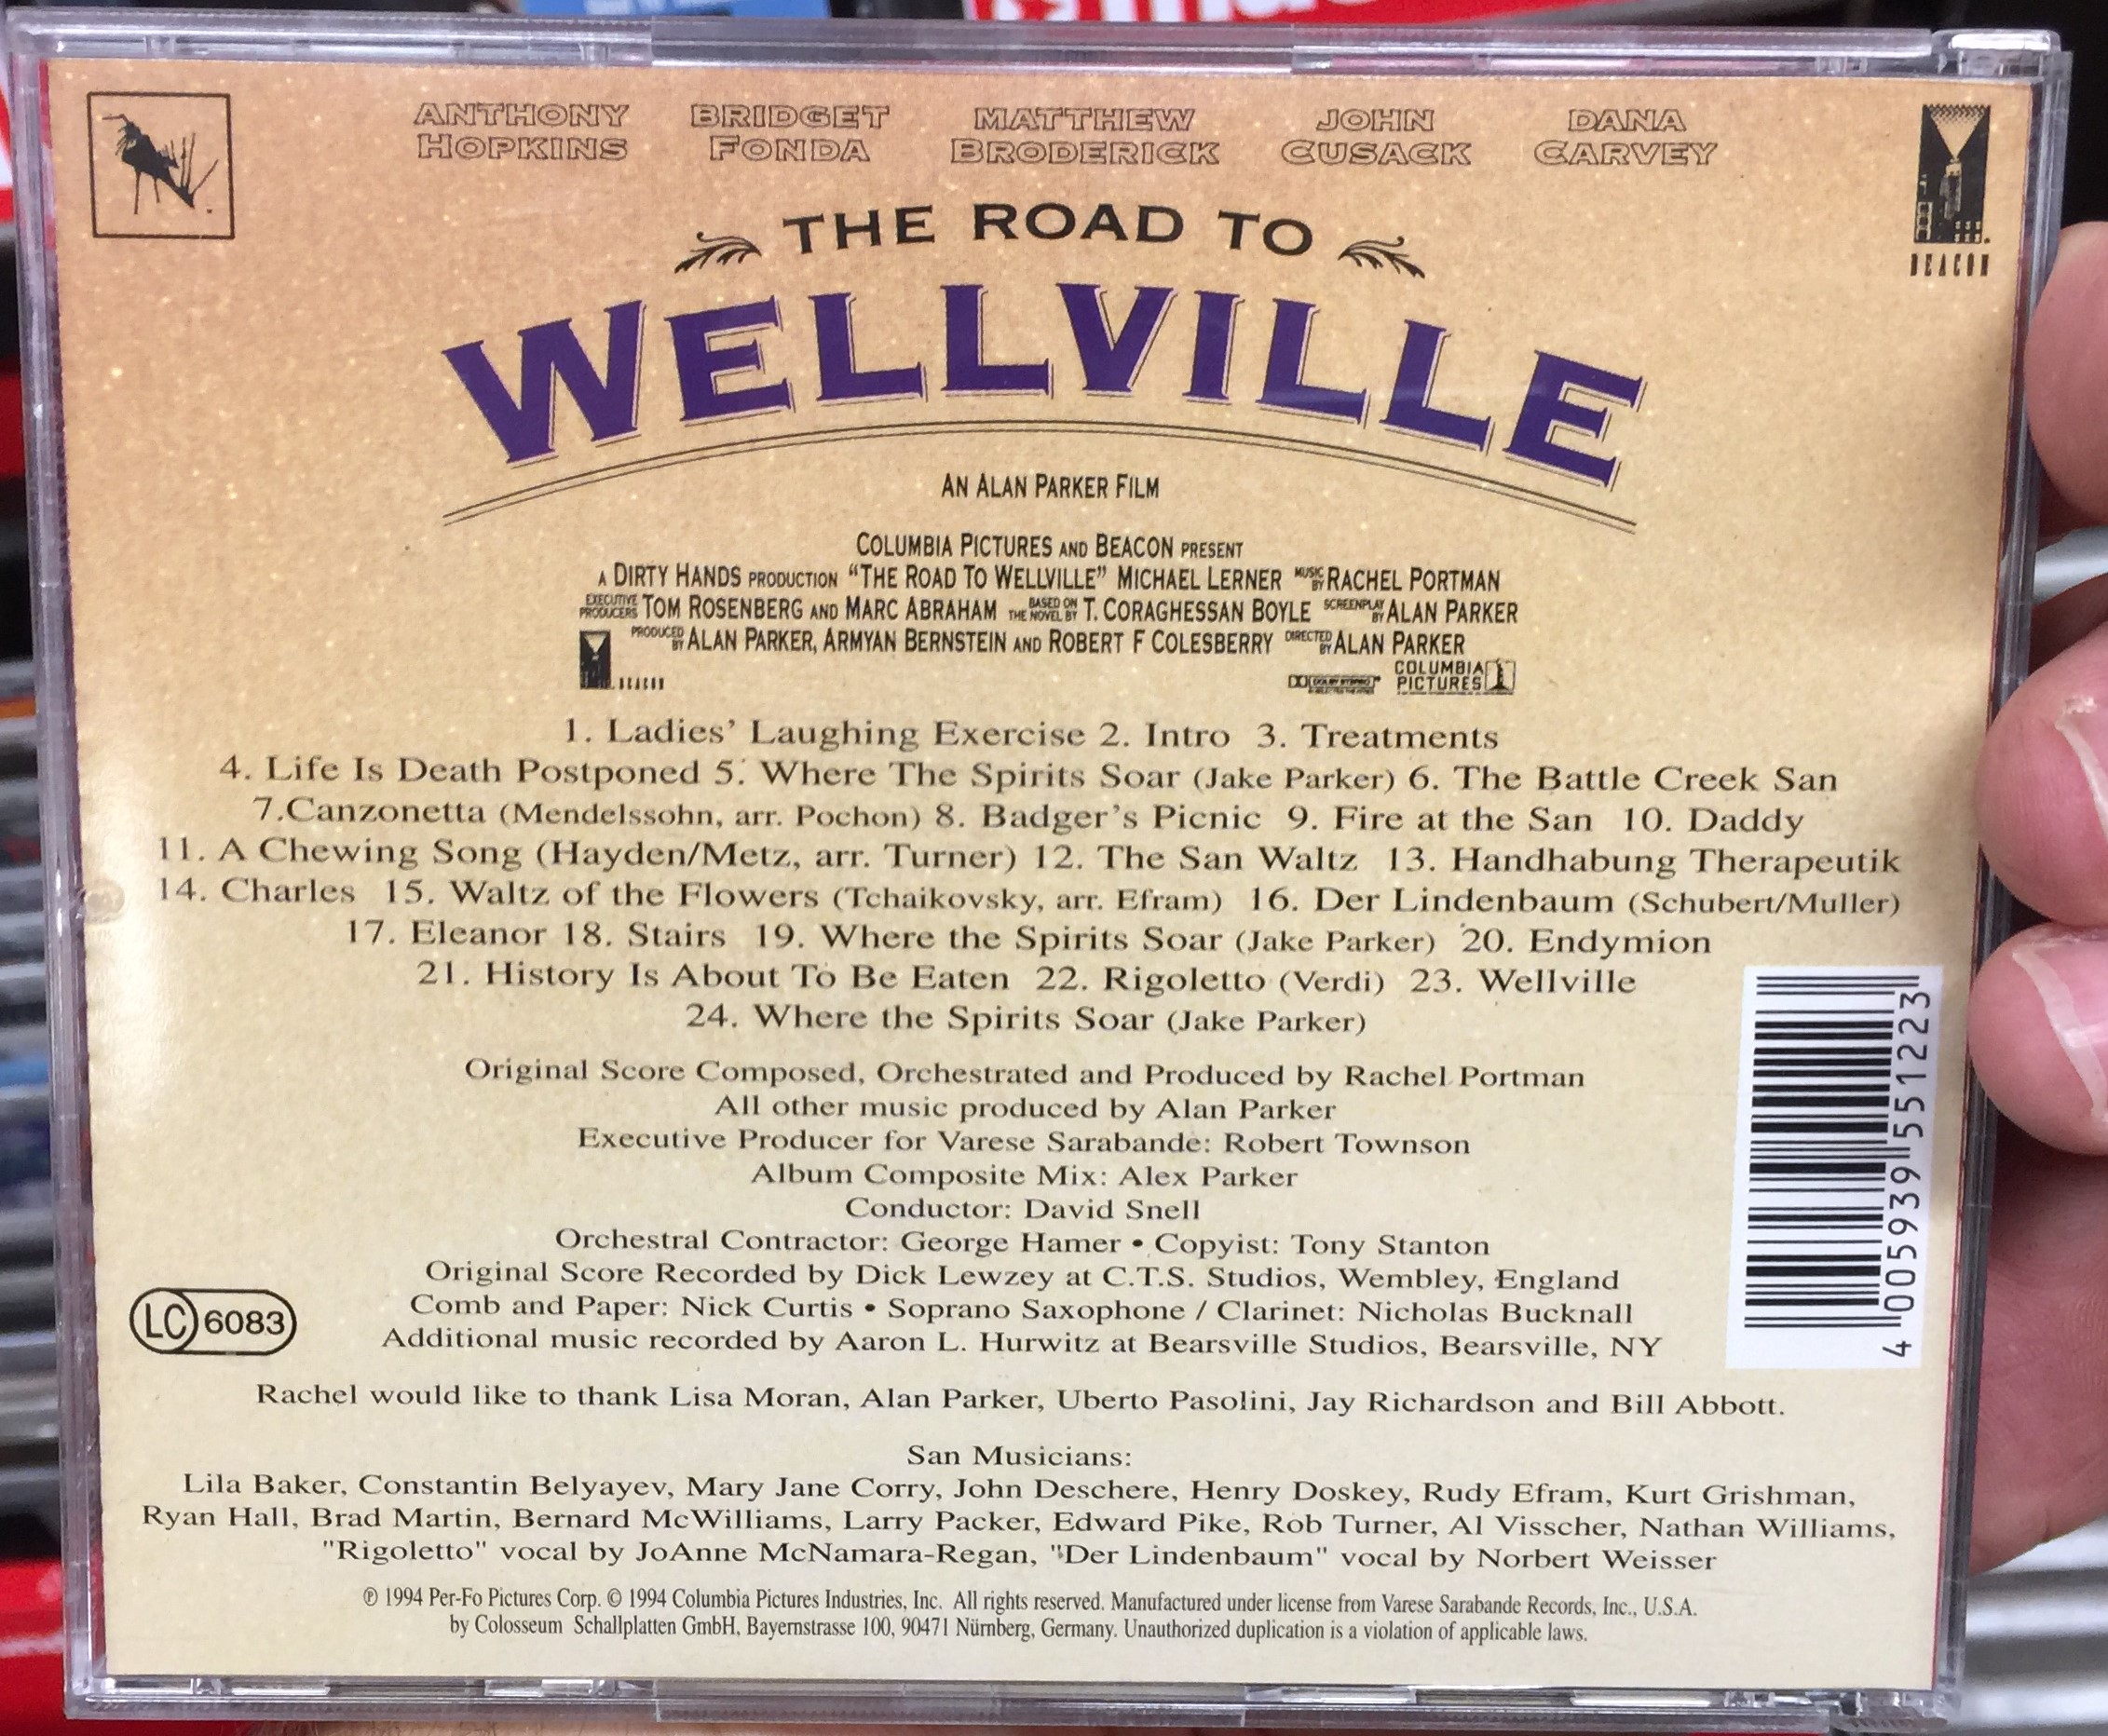 original-motion-picture-soundtrack-the-road-to-wellville-music-composed-by-rachel-portman-columbia-audio-cd-1994-4005939551223-2-.jpg